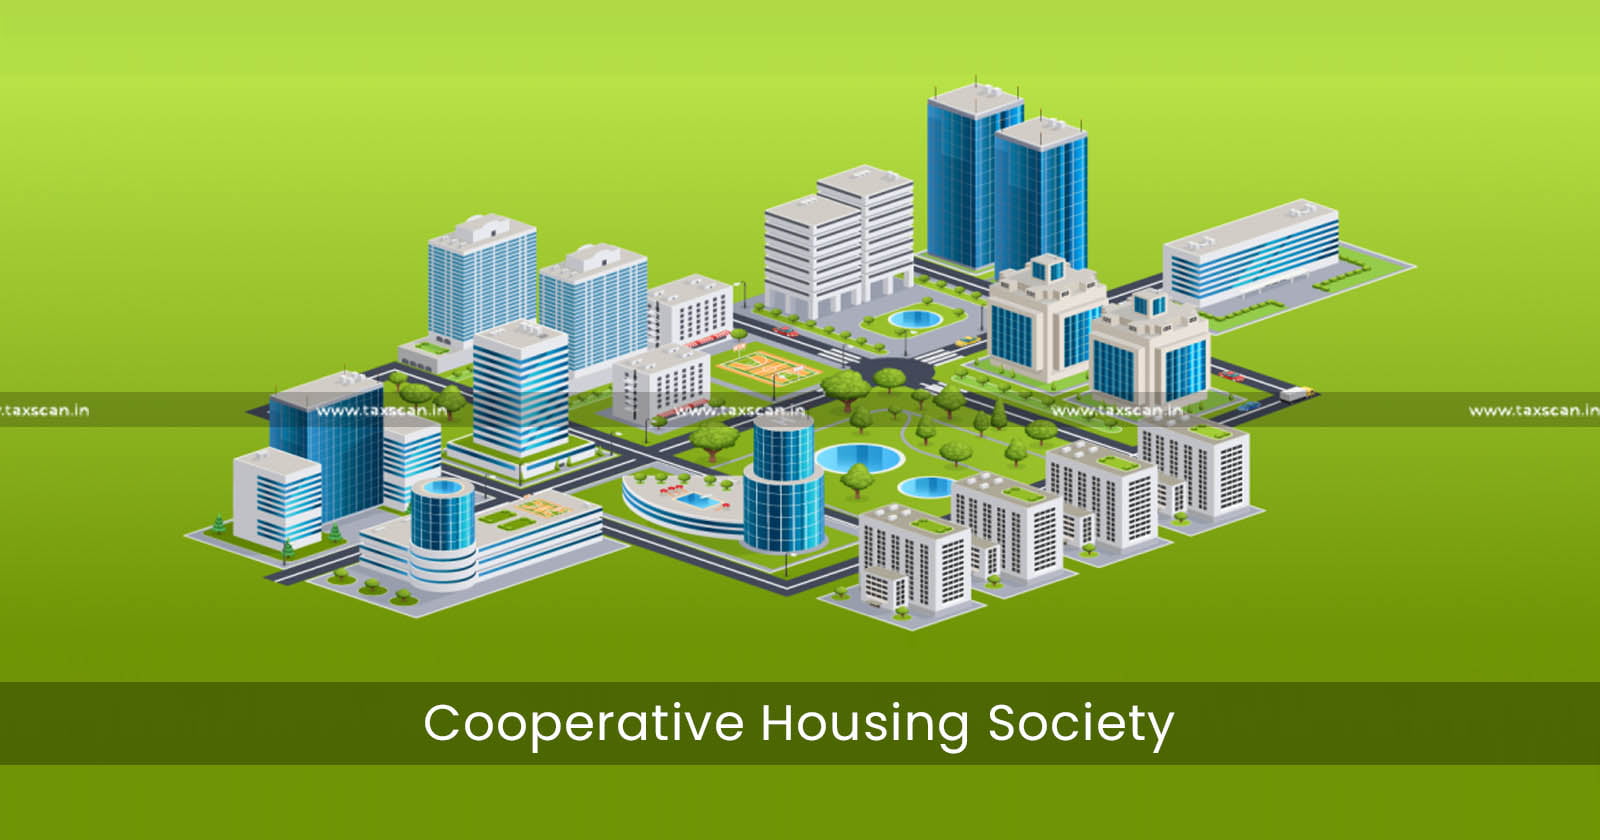 Construction of Complex - Cooperative Housing Society - Members - Liable - Service Tax - CESTAT - Customs - Excise - Taxscan